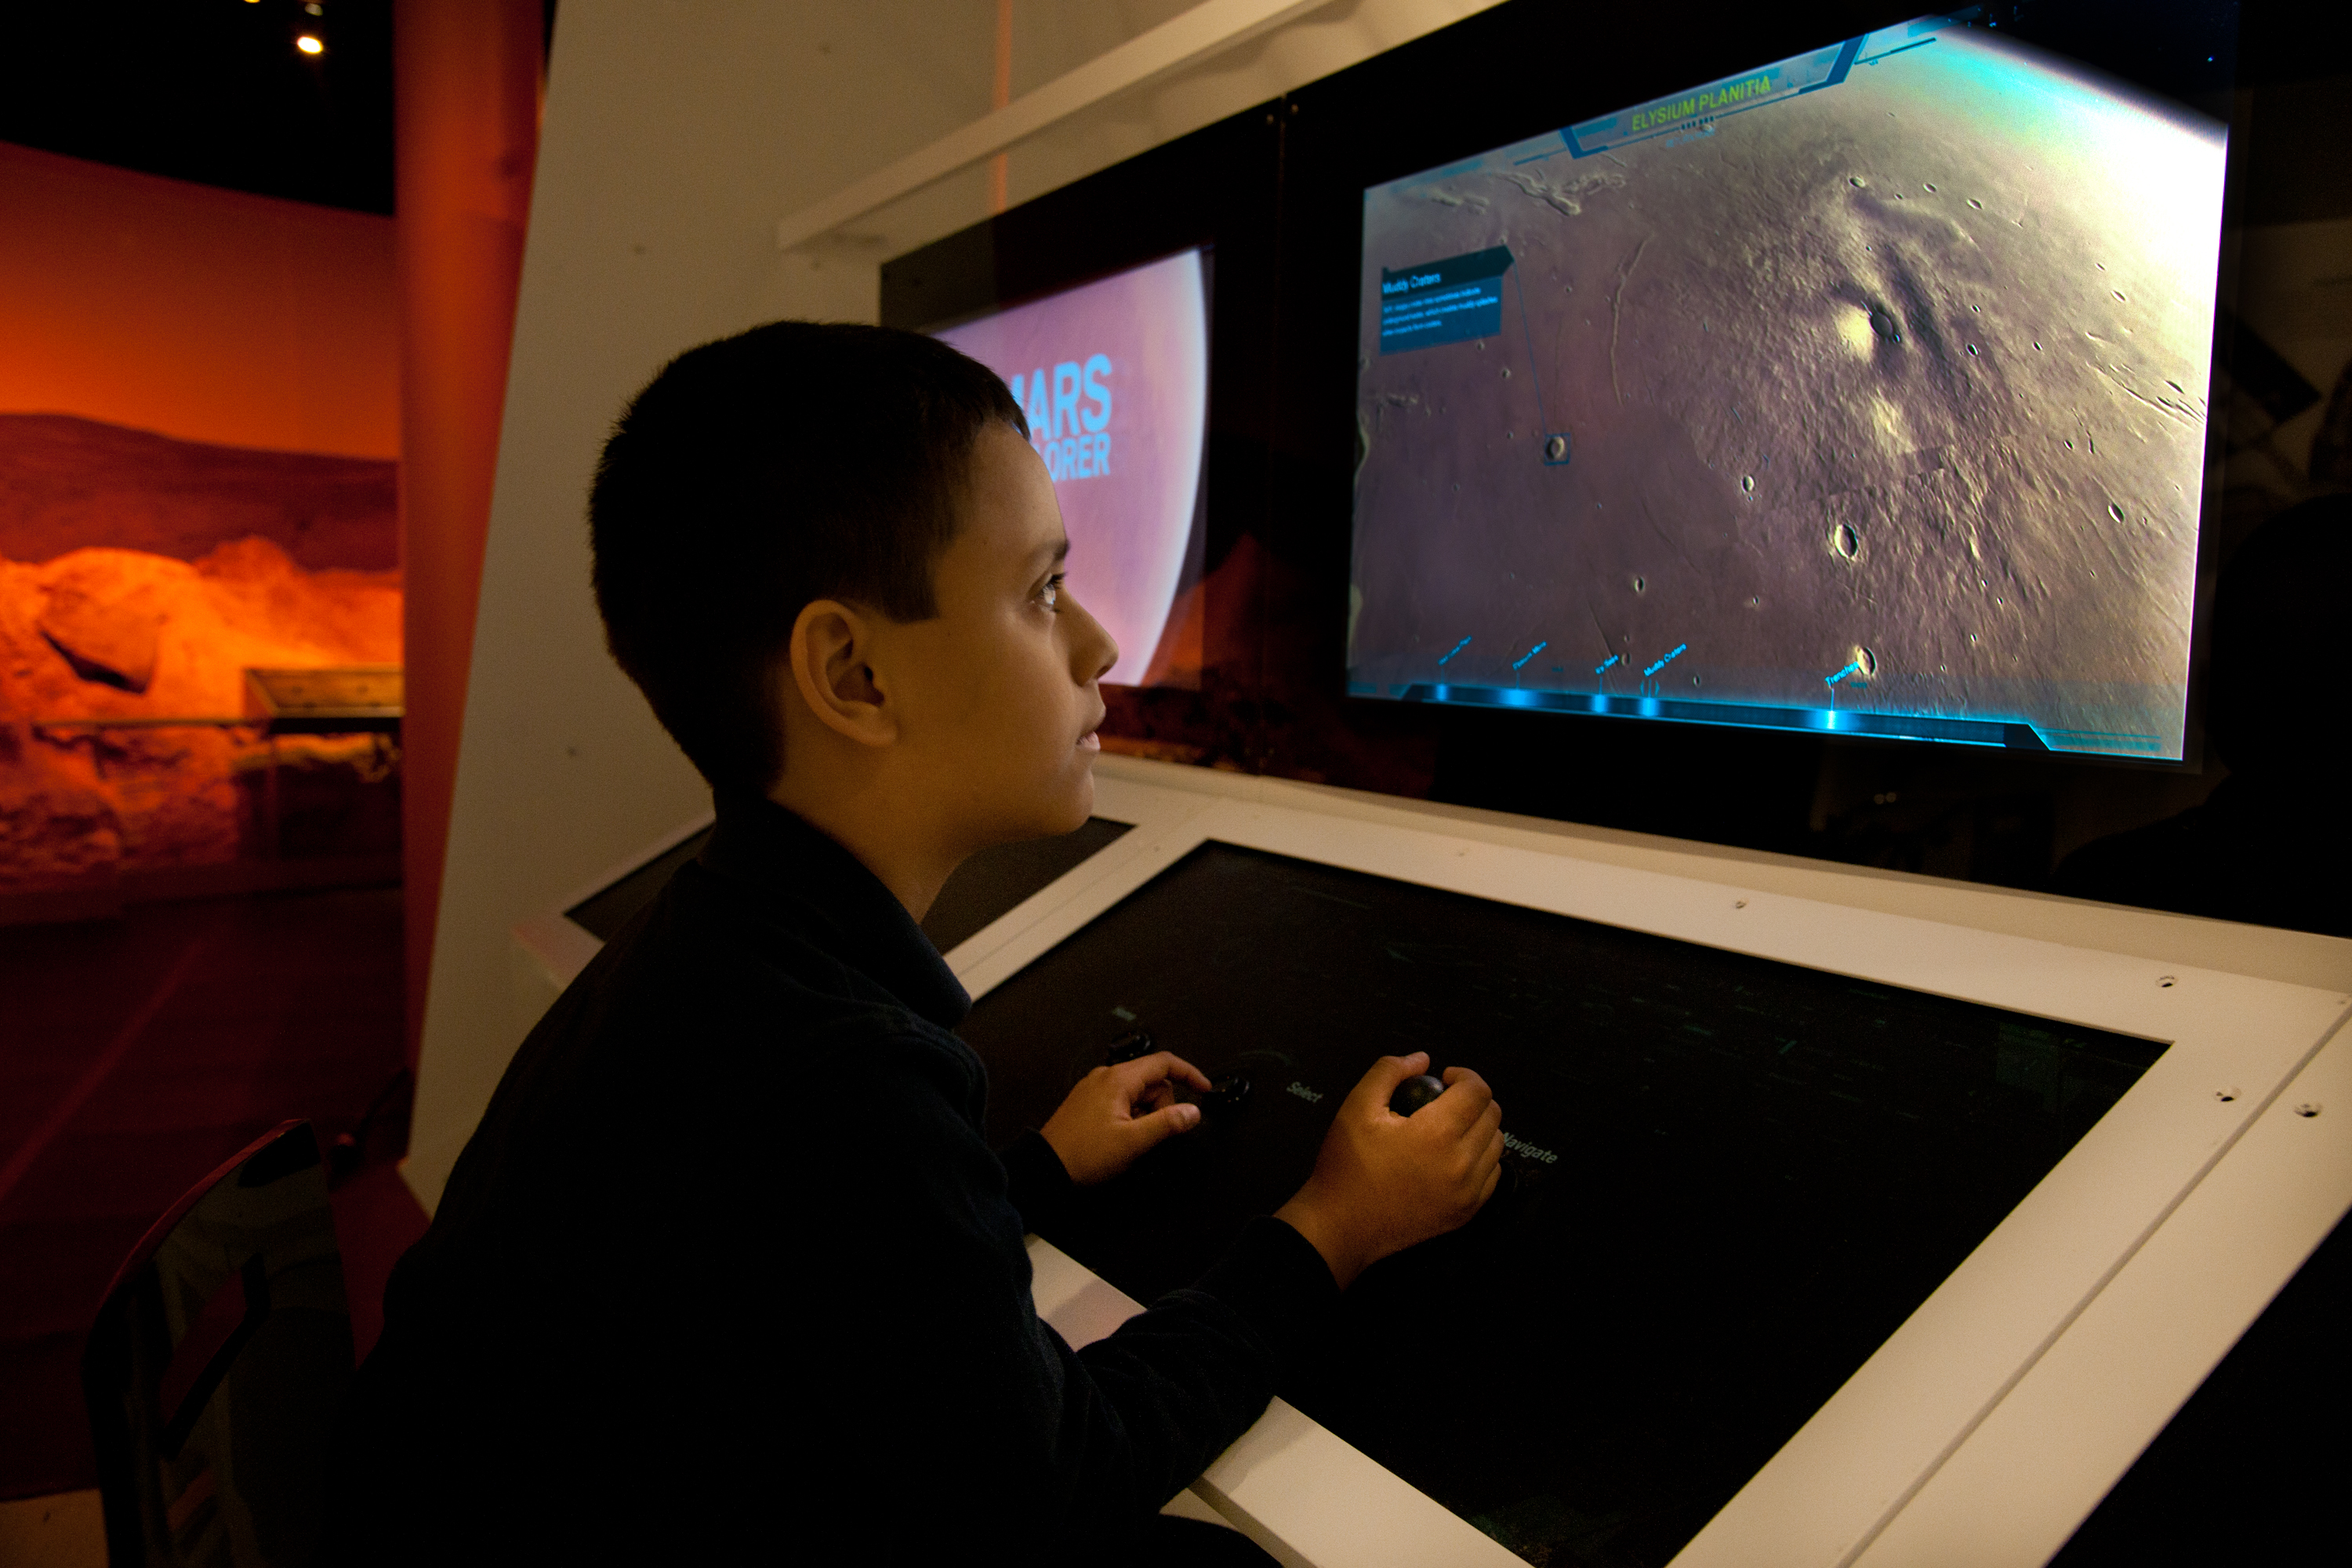 In Beyond Planet Earth, visitors can fly around Mars and zoom in on cavernous craters, massive volcanoes, and vast valleys with an interactive Mars Explorer console.